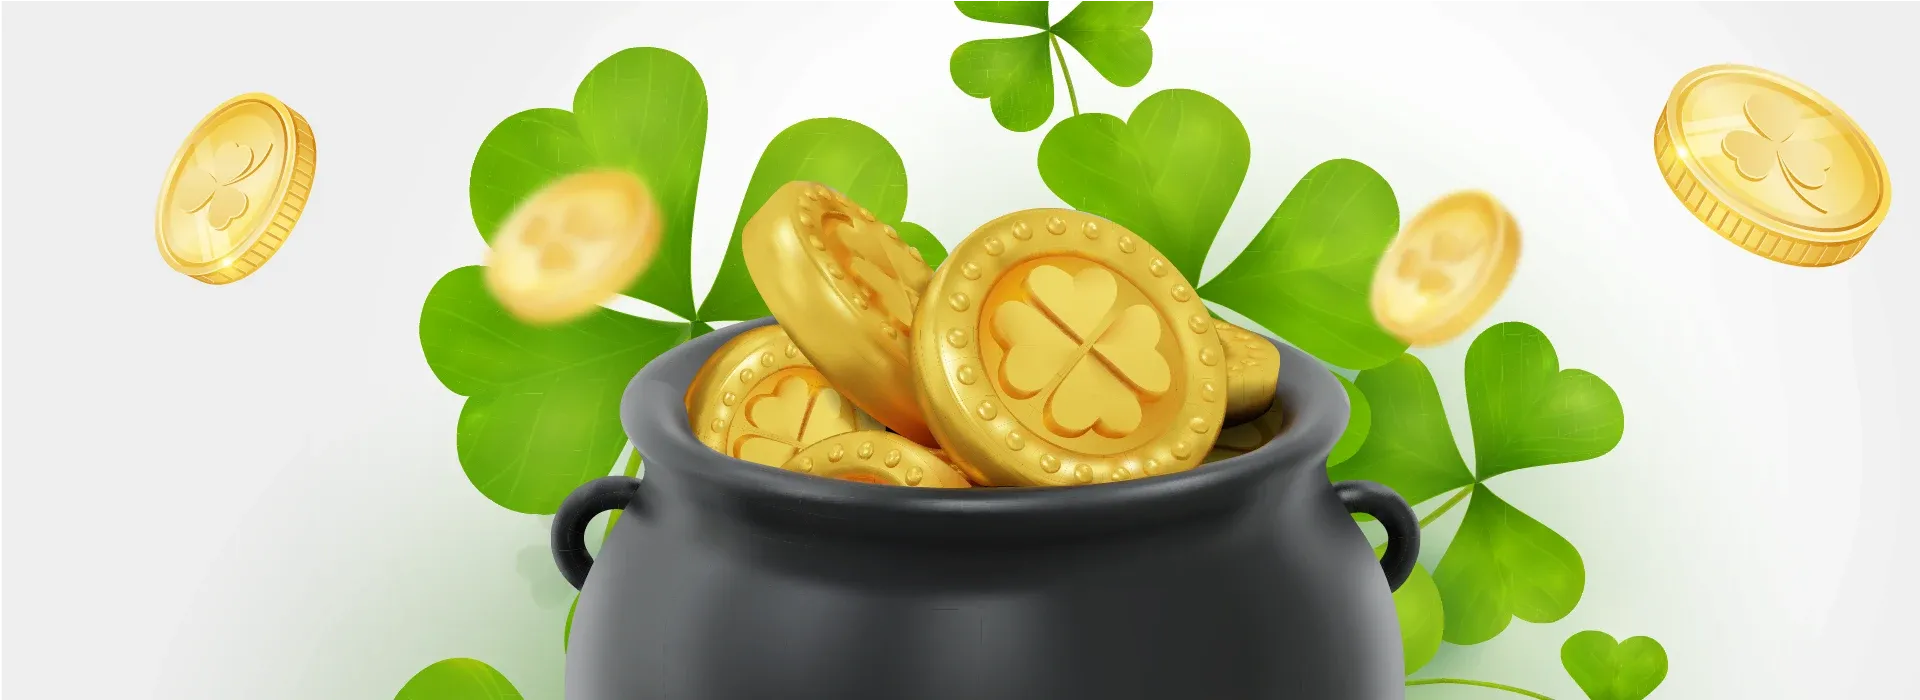 an image of a pot with coins inside and clovers around